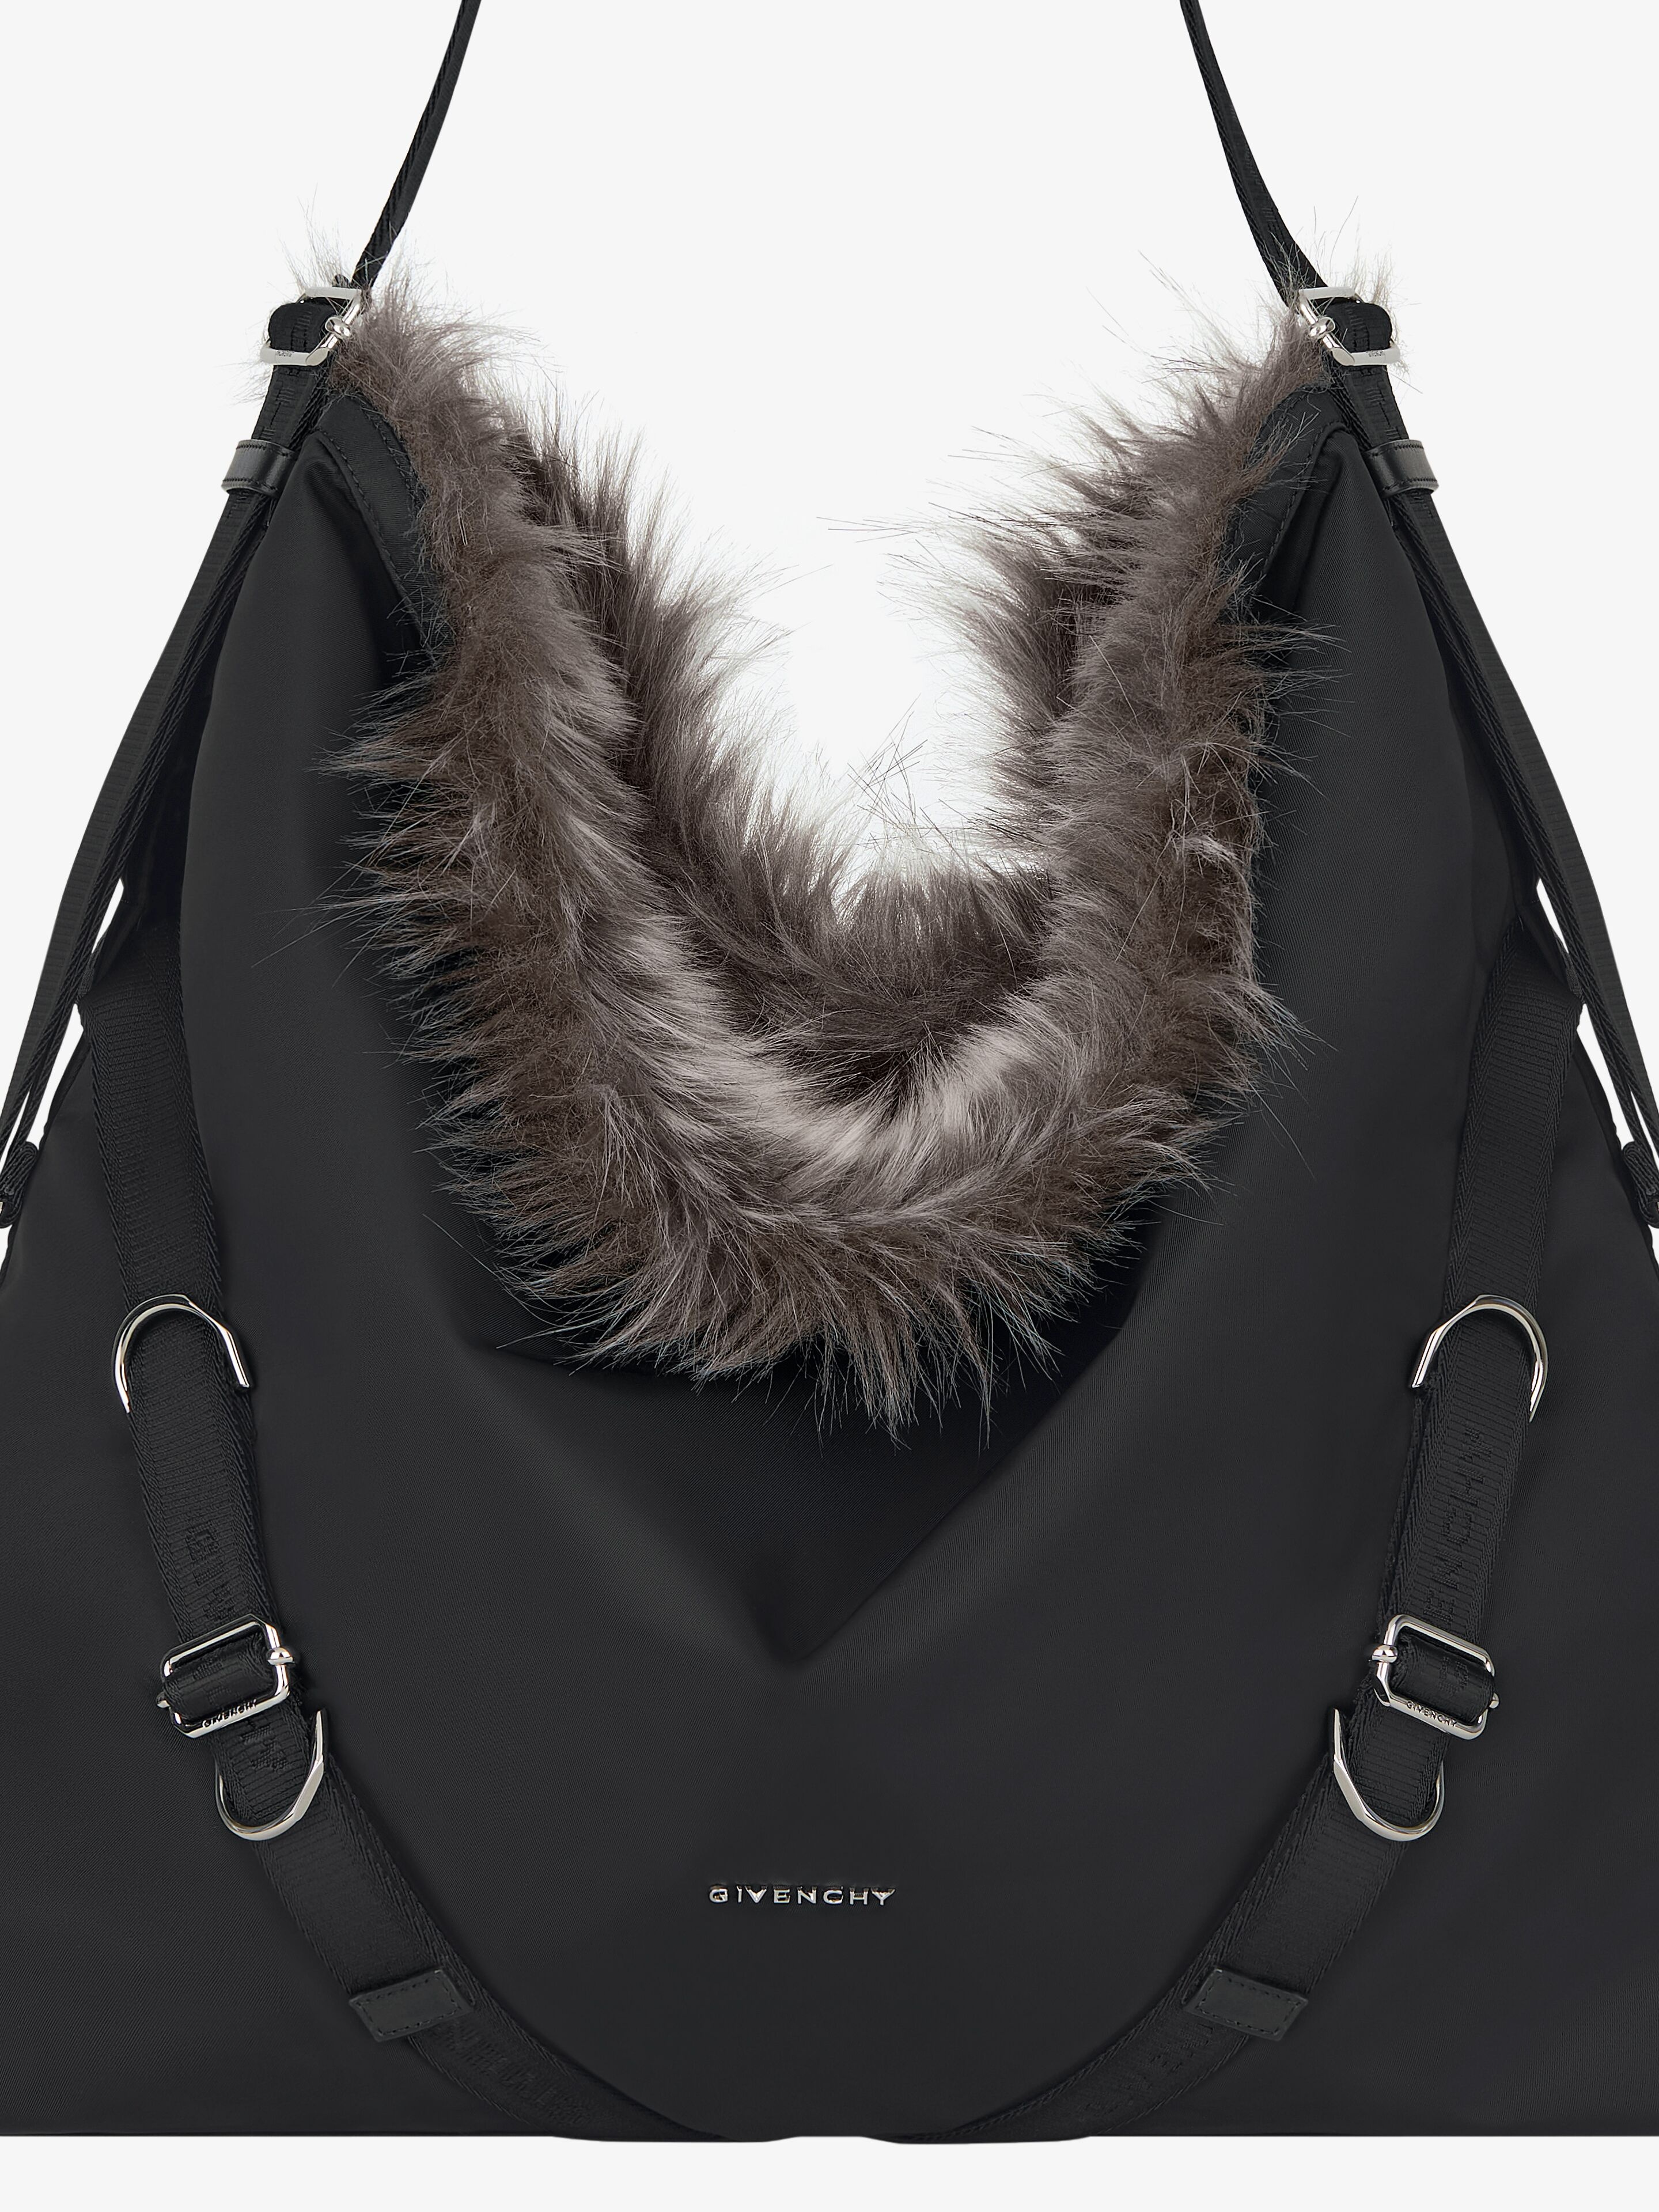 LARGE VOYOU BAG IN NYLON AND FAUX FUR - 6